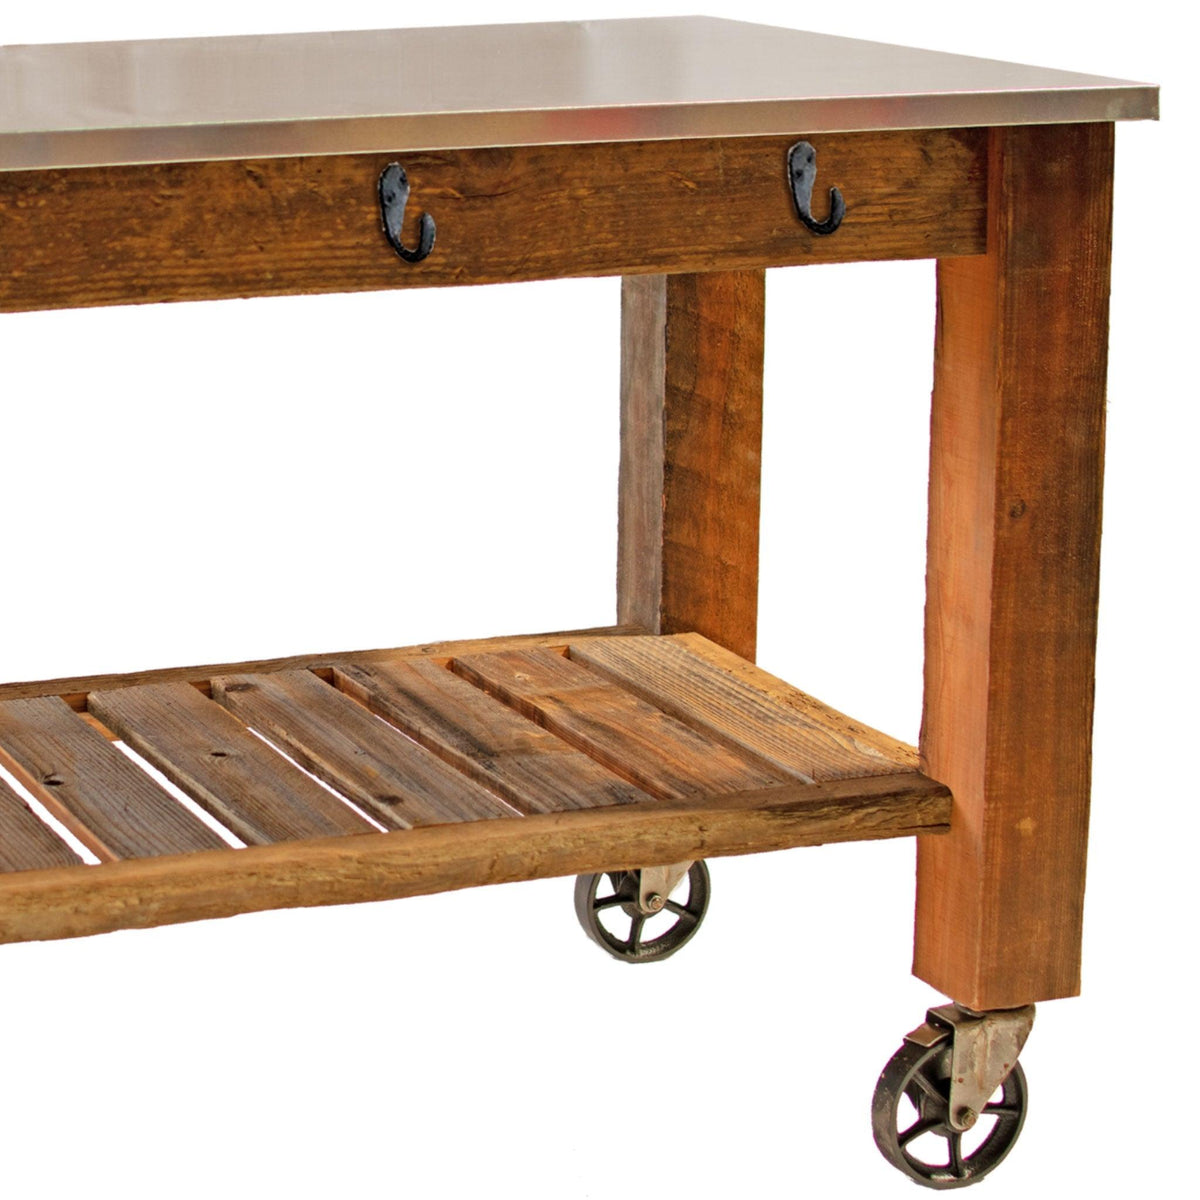 Legs and Hooks of Lee Display's Redwood Potting Table Rolling Cart with 6in Vintage Casters and Hardware on sale now at leedisplay.com